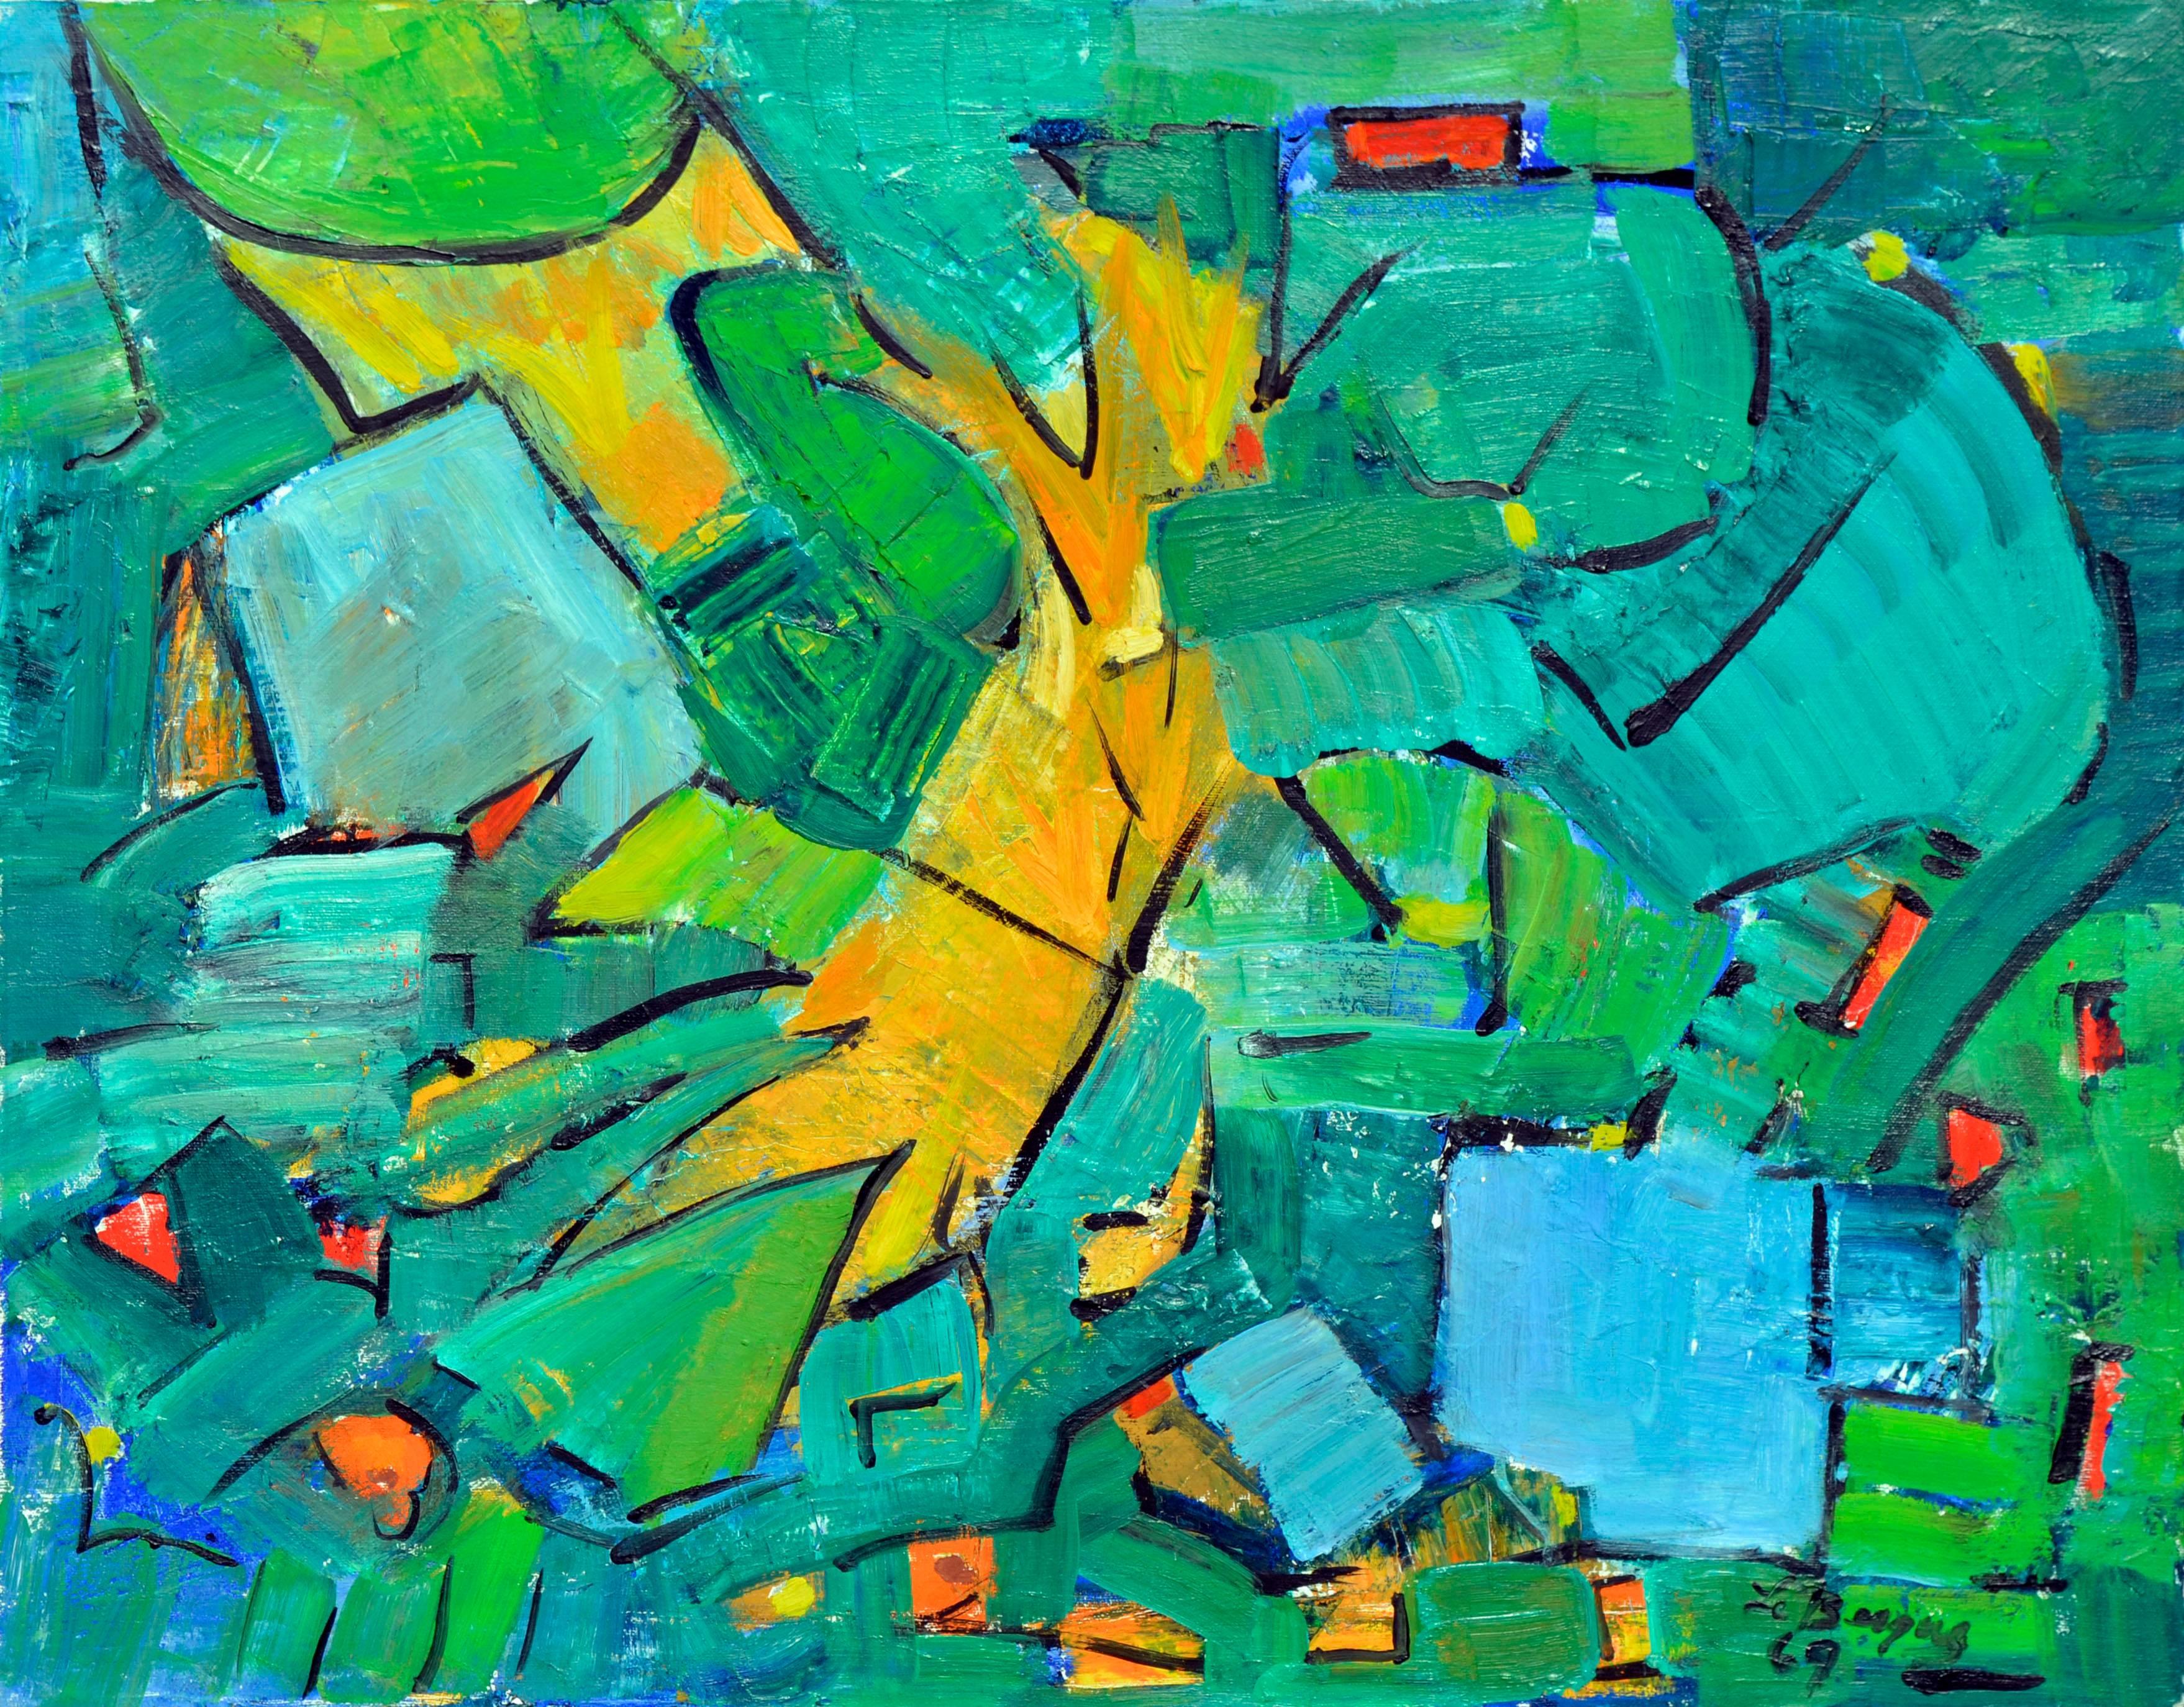 Le Besque Abstract Painting - Garden Green & Cyan Abstract